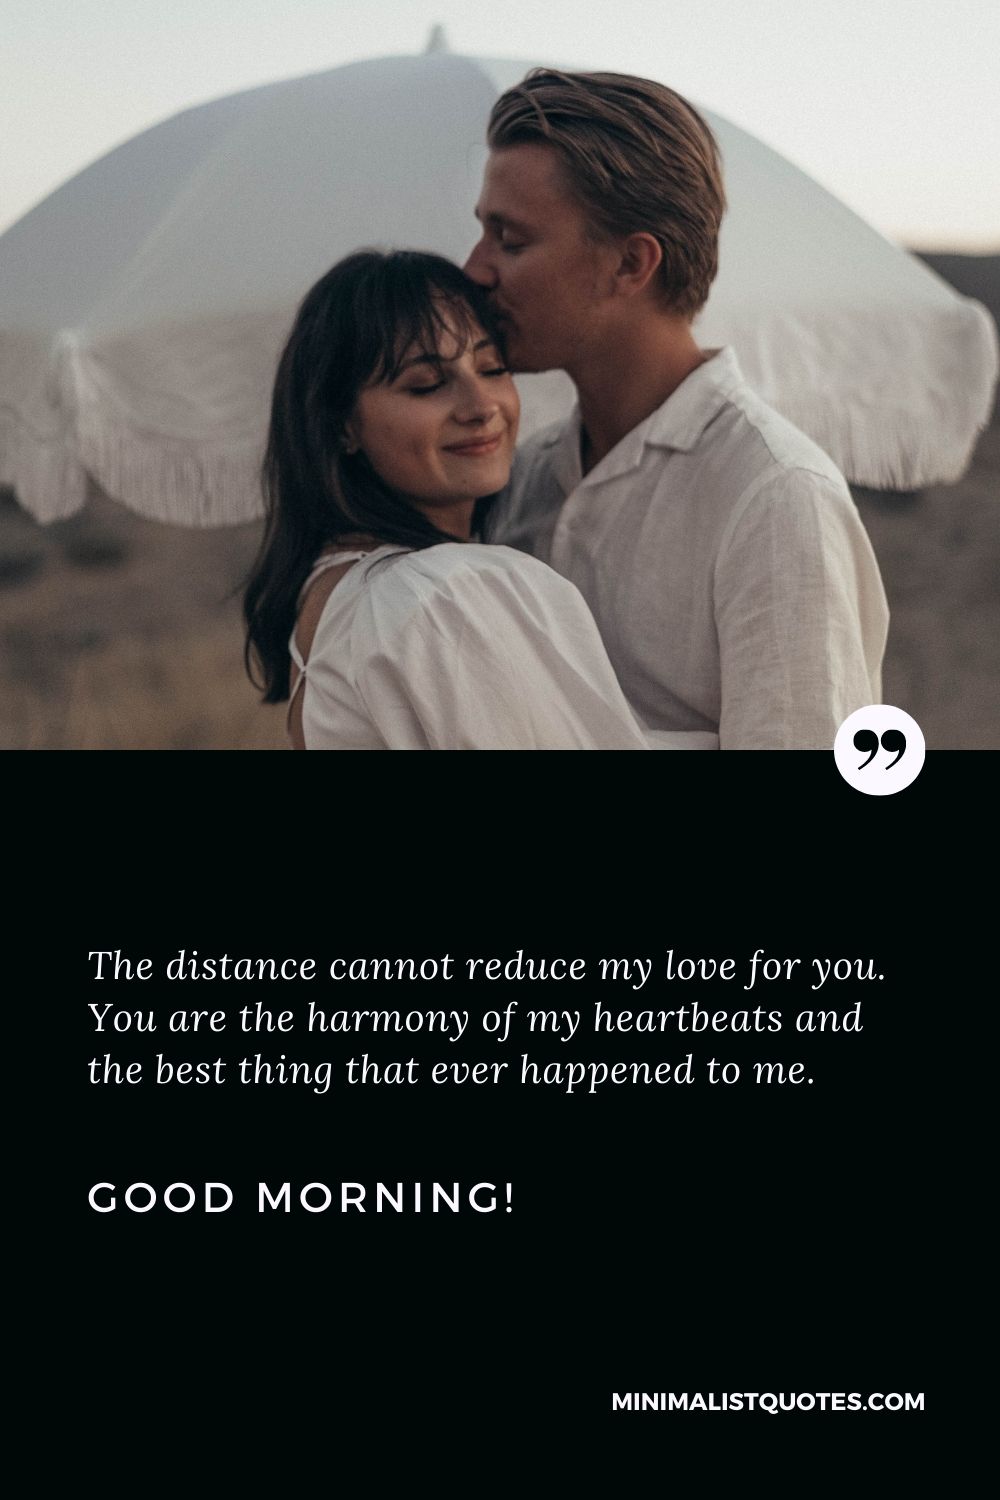 Good morning wishes for wife: The distance cannot reduce my love for you. You are the harmony of my heartbeats and the best thing that ever happened to me. Good Morning!